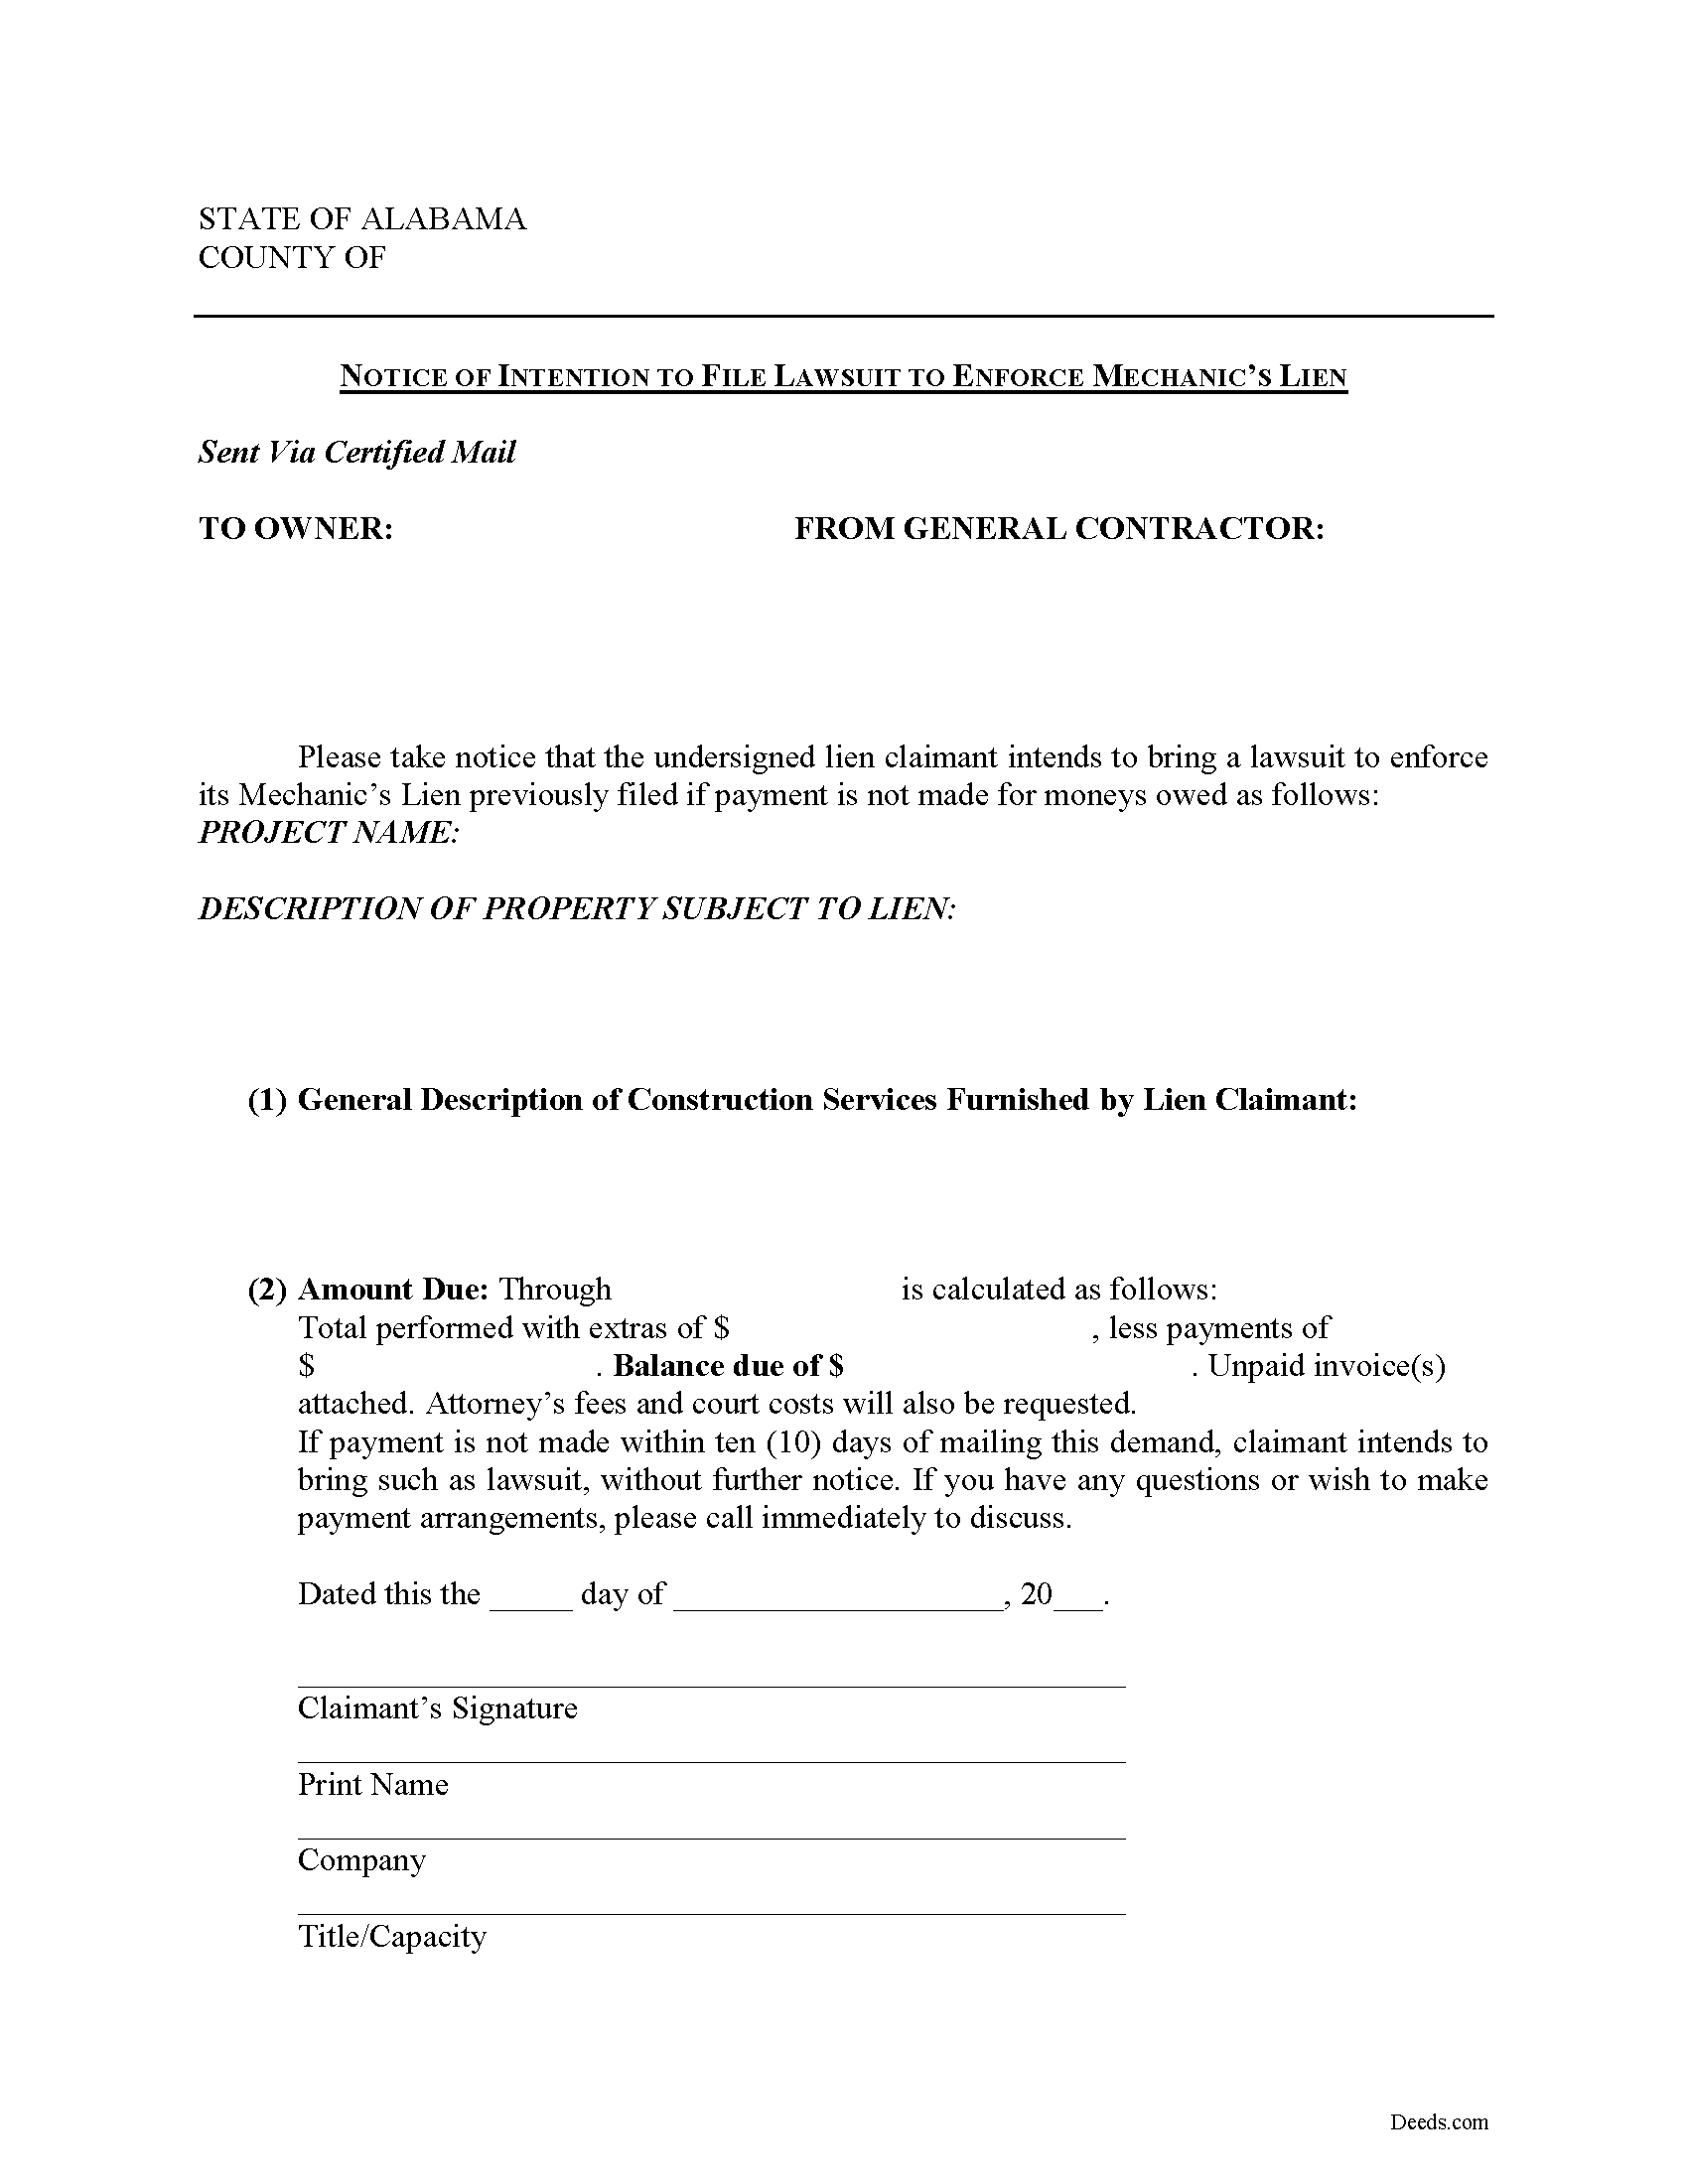 Notice of Intention Form